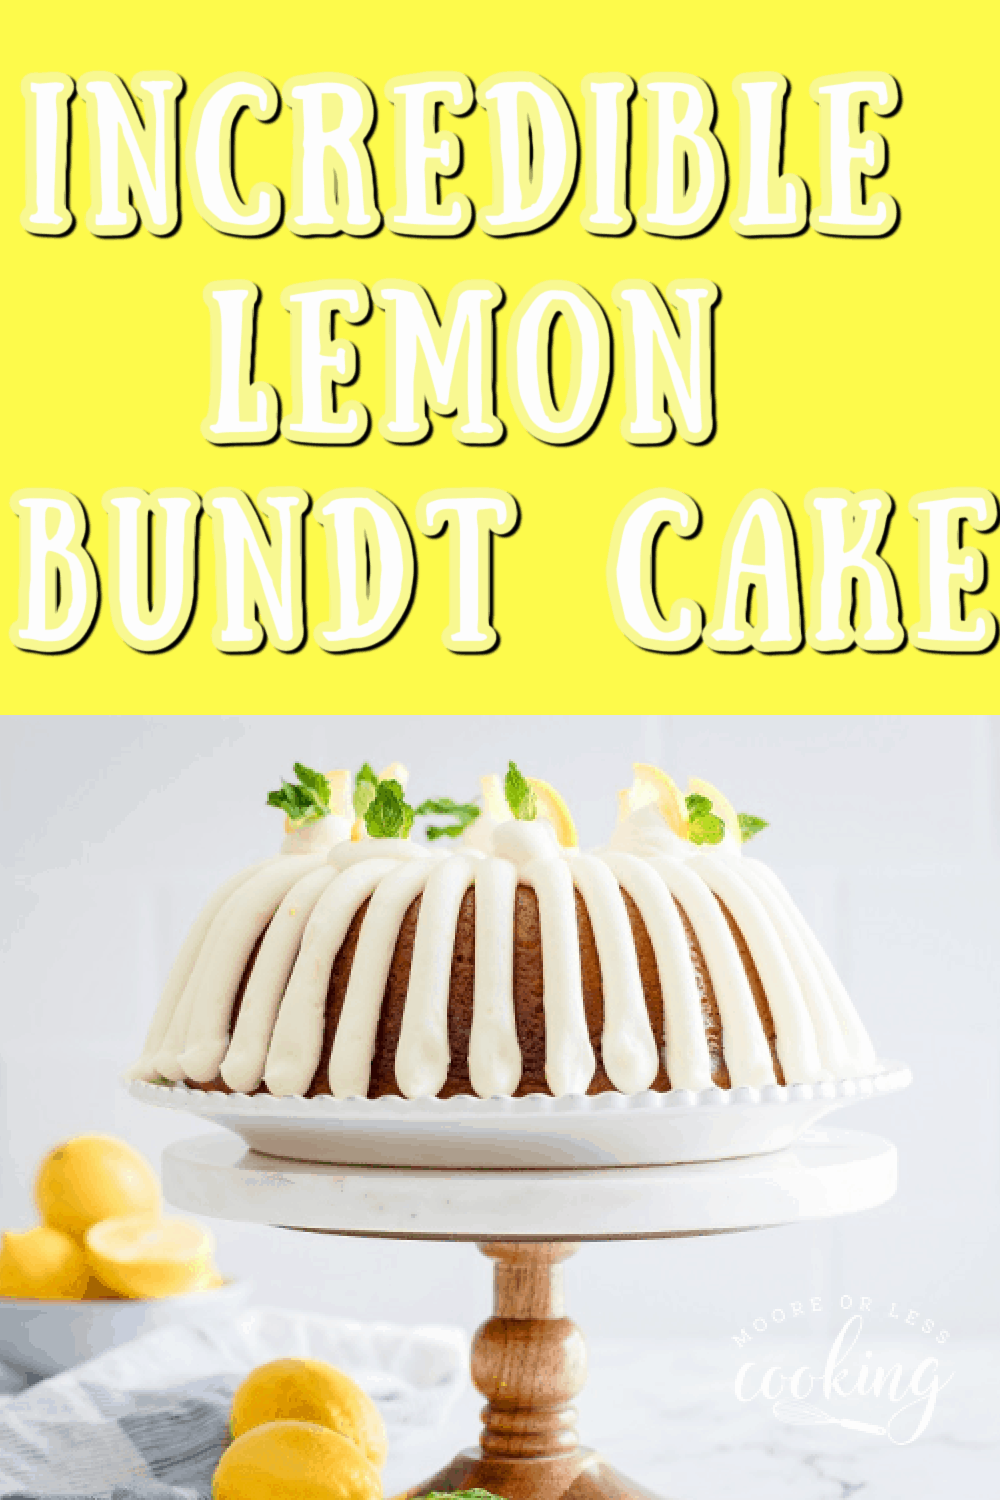 Incredible lemon bundt cake is bursting with lemon flavor throughout. Completely made from scratch drizzled with lemon cream cheese frosting and a lemon glaze sauce over the cake. via @Mooreorlesscook